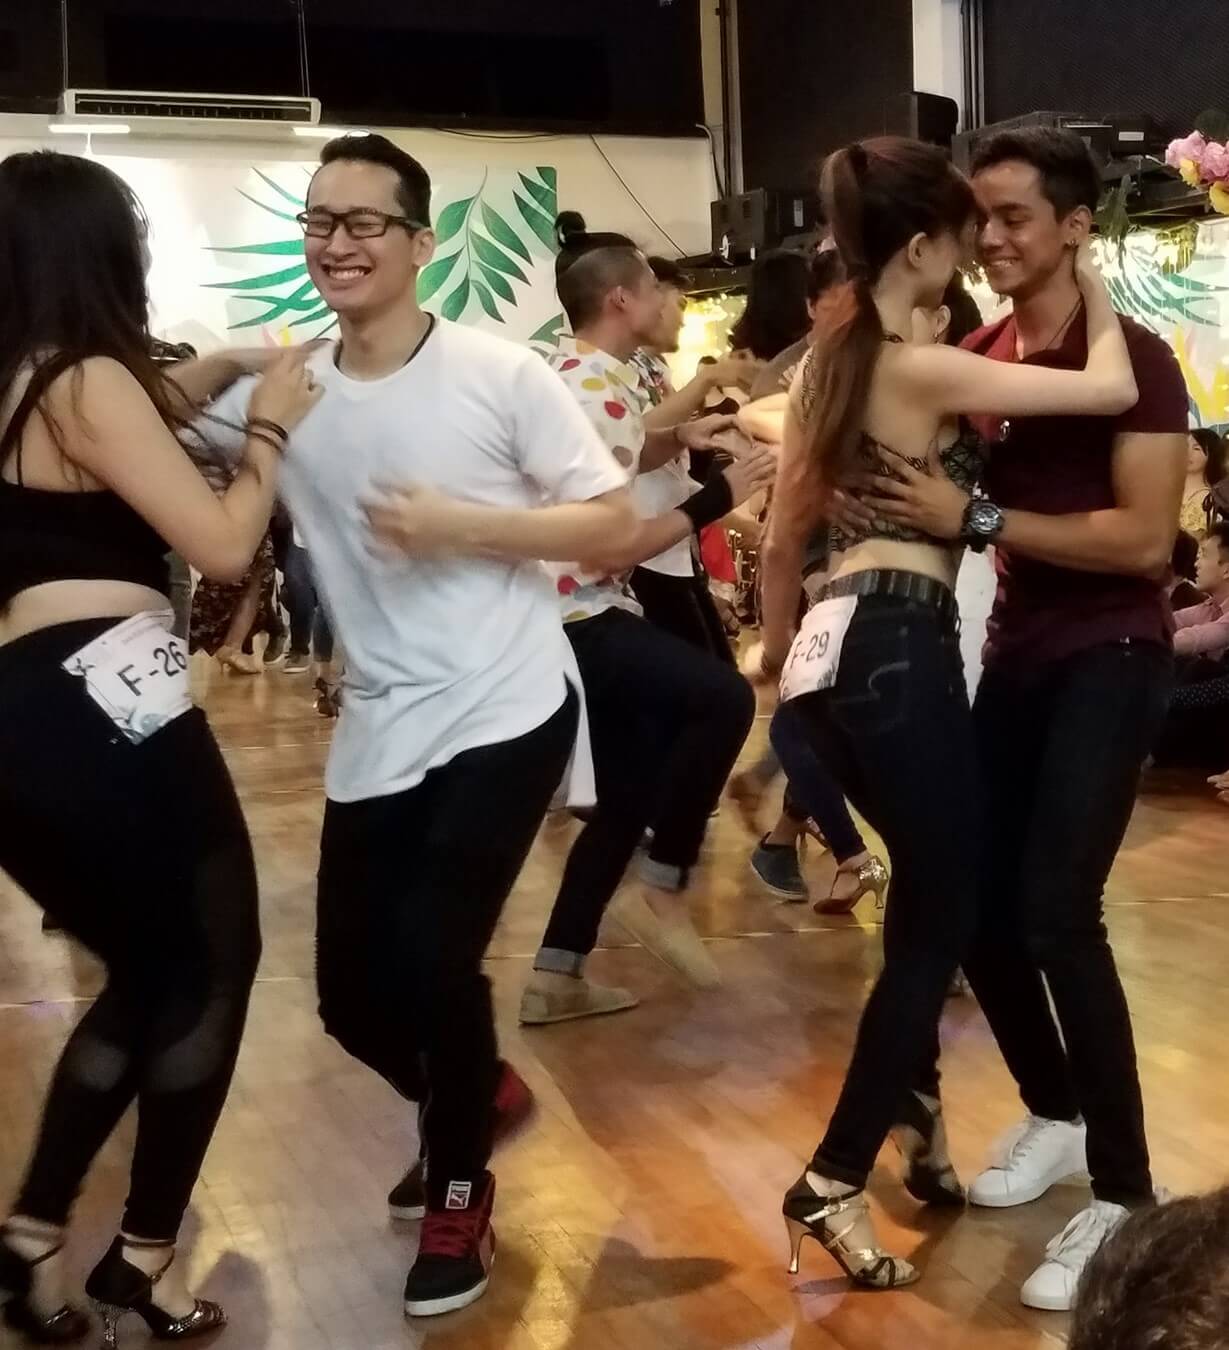 Bachata For Beginners -Couples competing in a Bachata Dance Competition in Singapore.